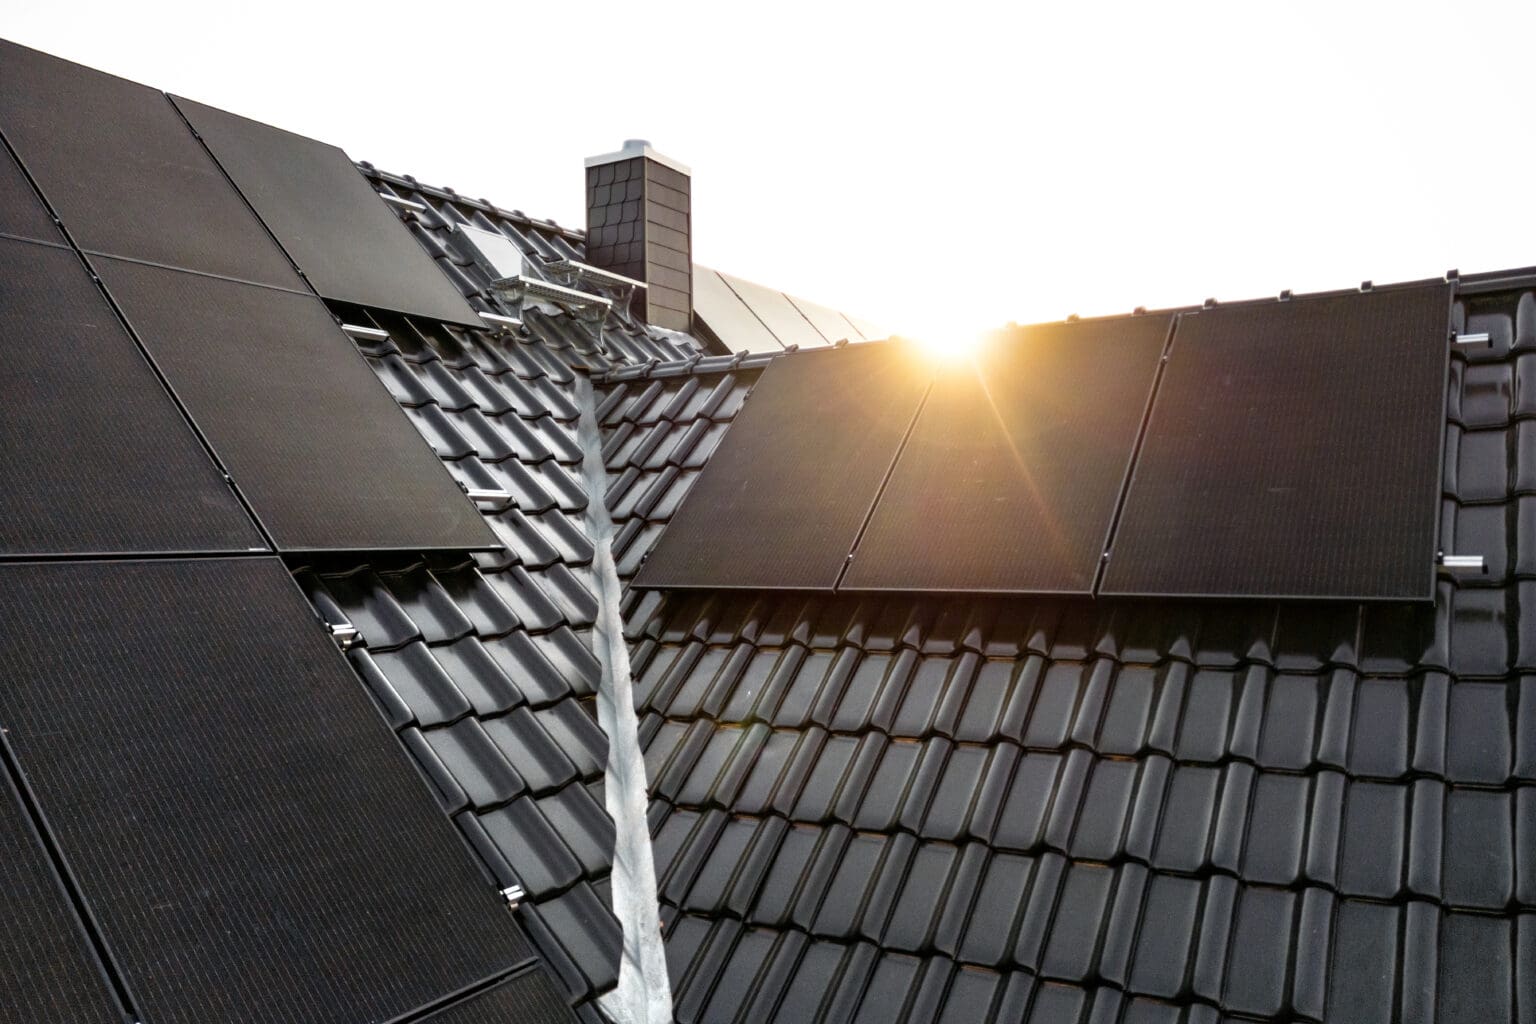 Solar panels on a dark tiled roof captured with a lens flare at